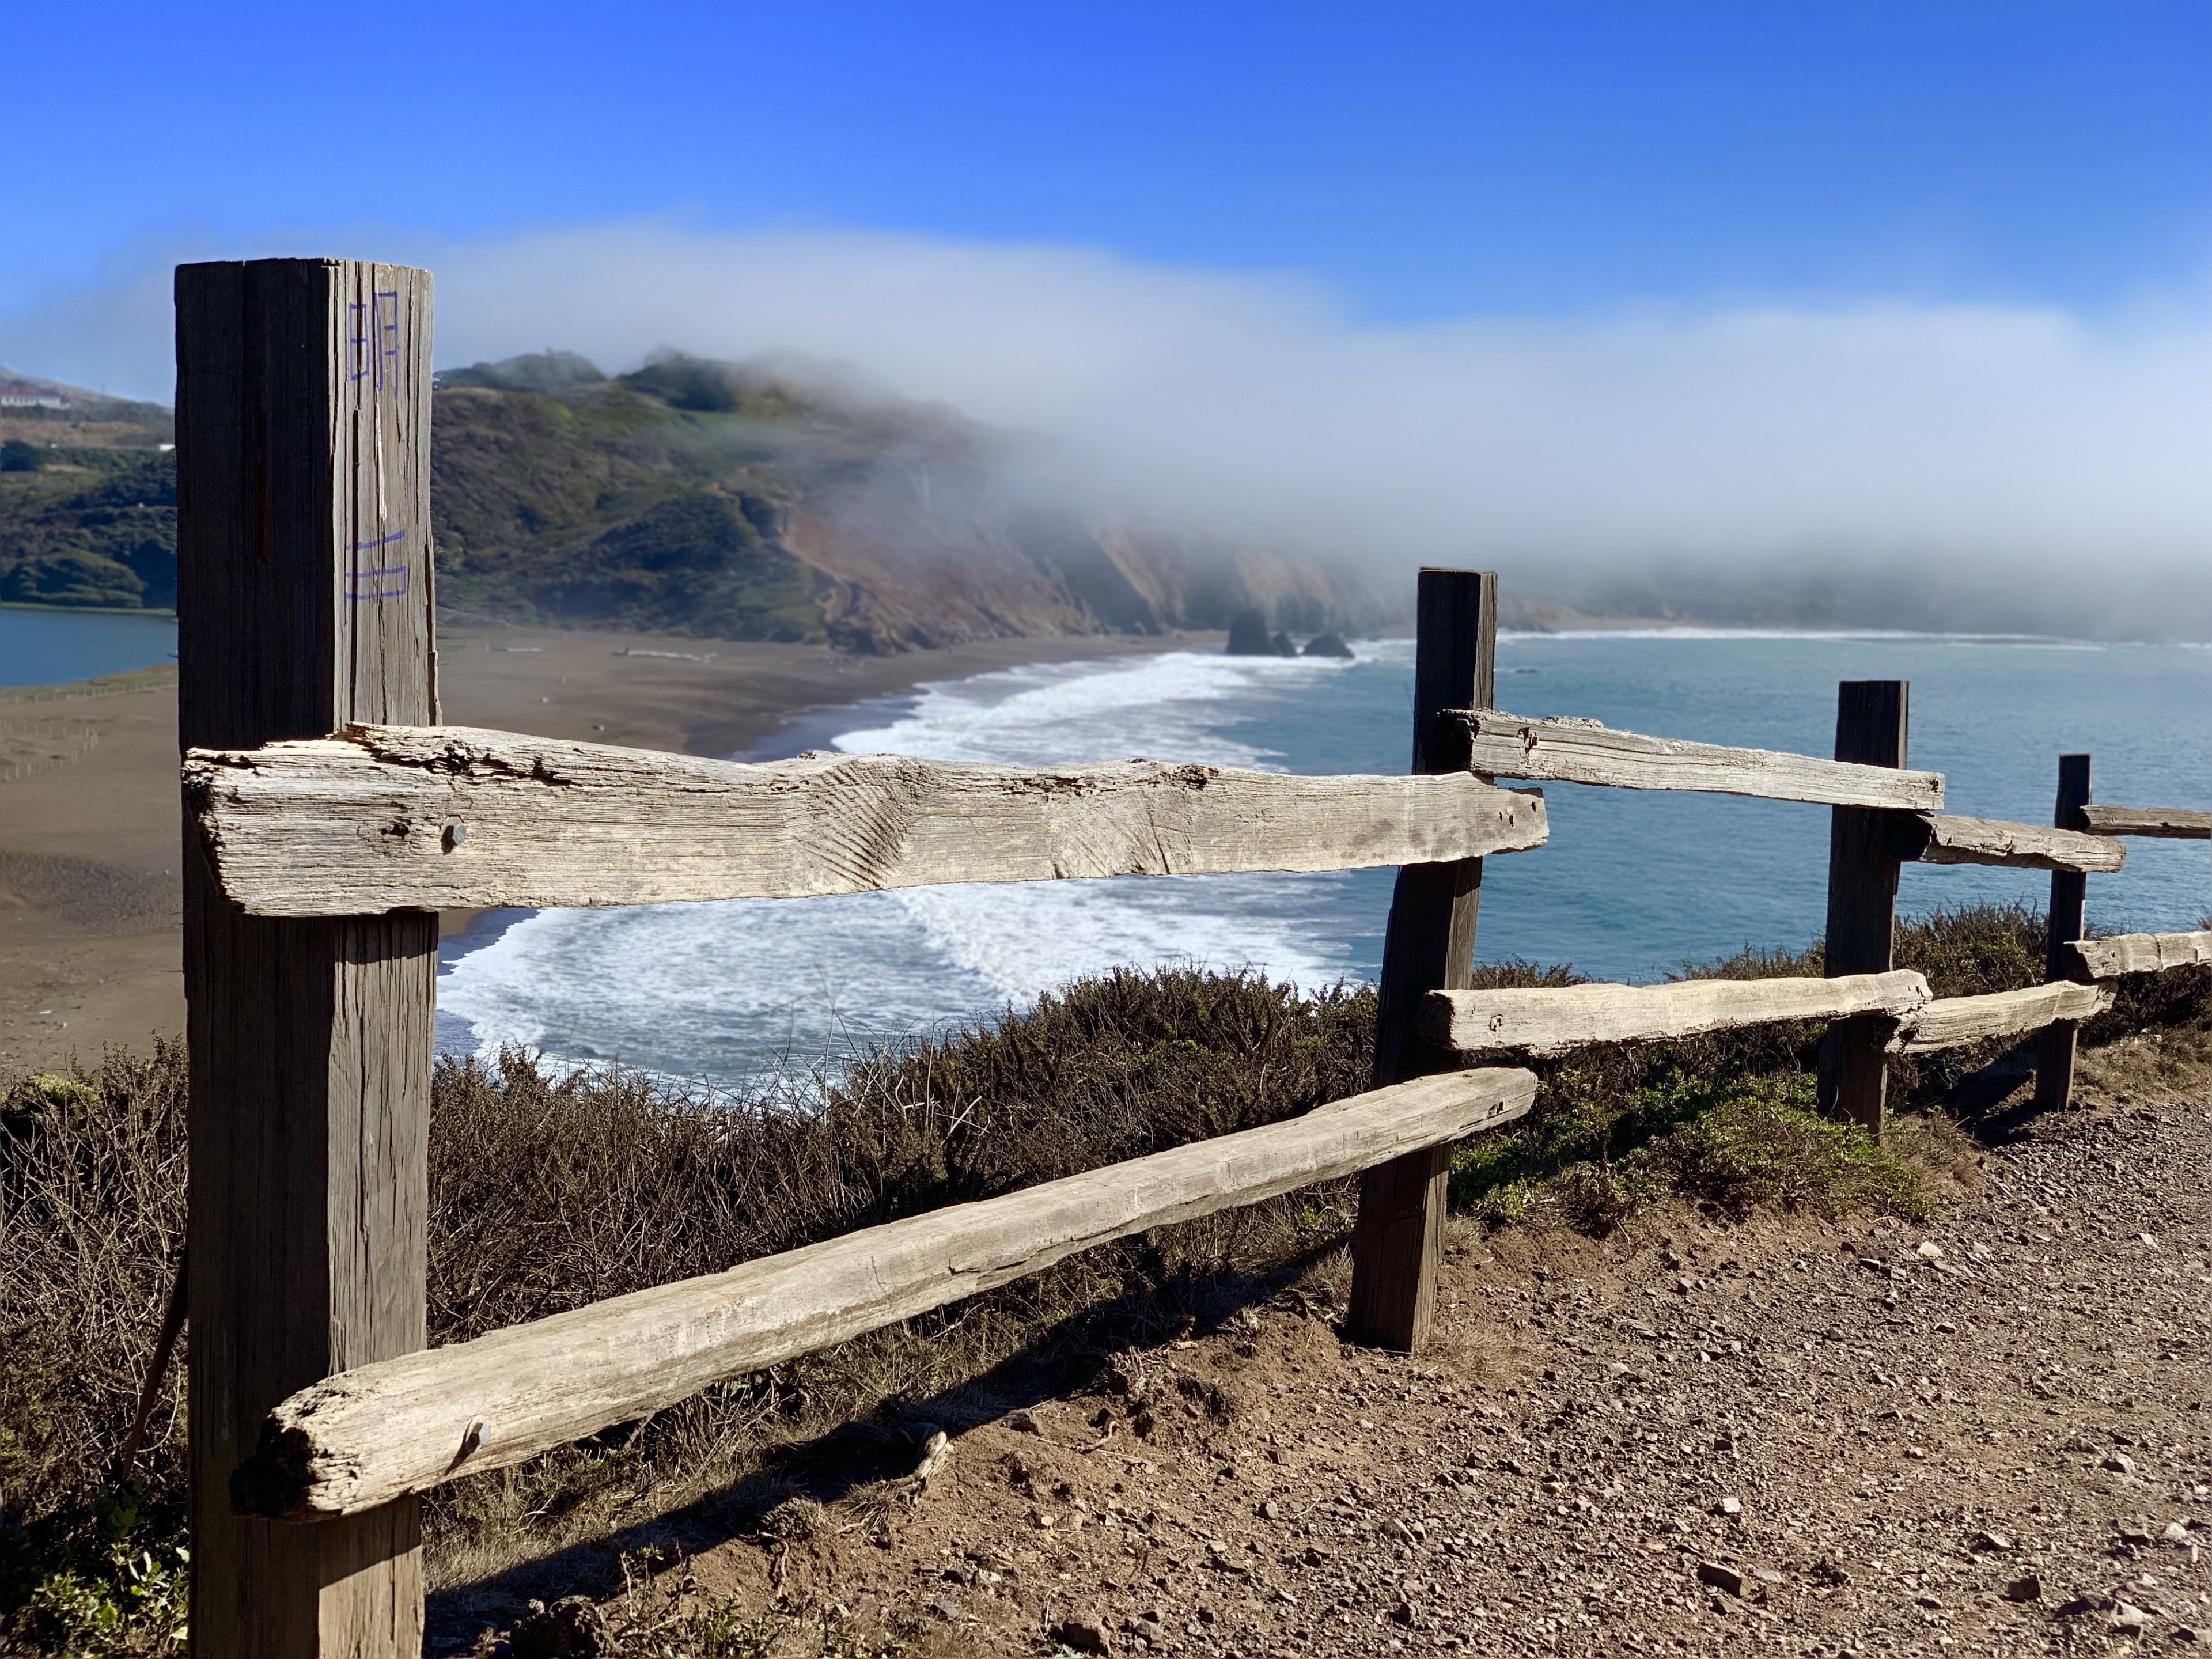 Not that far away from San Francisco- Rodeo Beach provide a gorgeous oceanfront with 360 view of the Marin Headlands , 1053-foot hill up the flank of Mount Tamalpais. A place where you can take a seat and watch the waves without a care in the world...